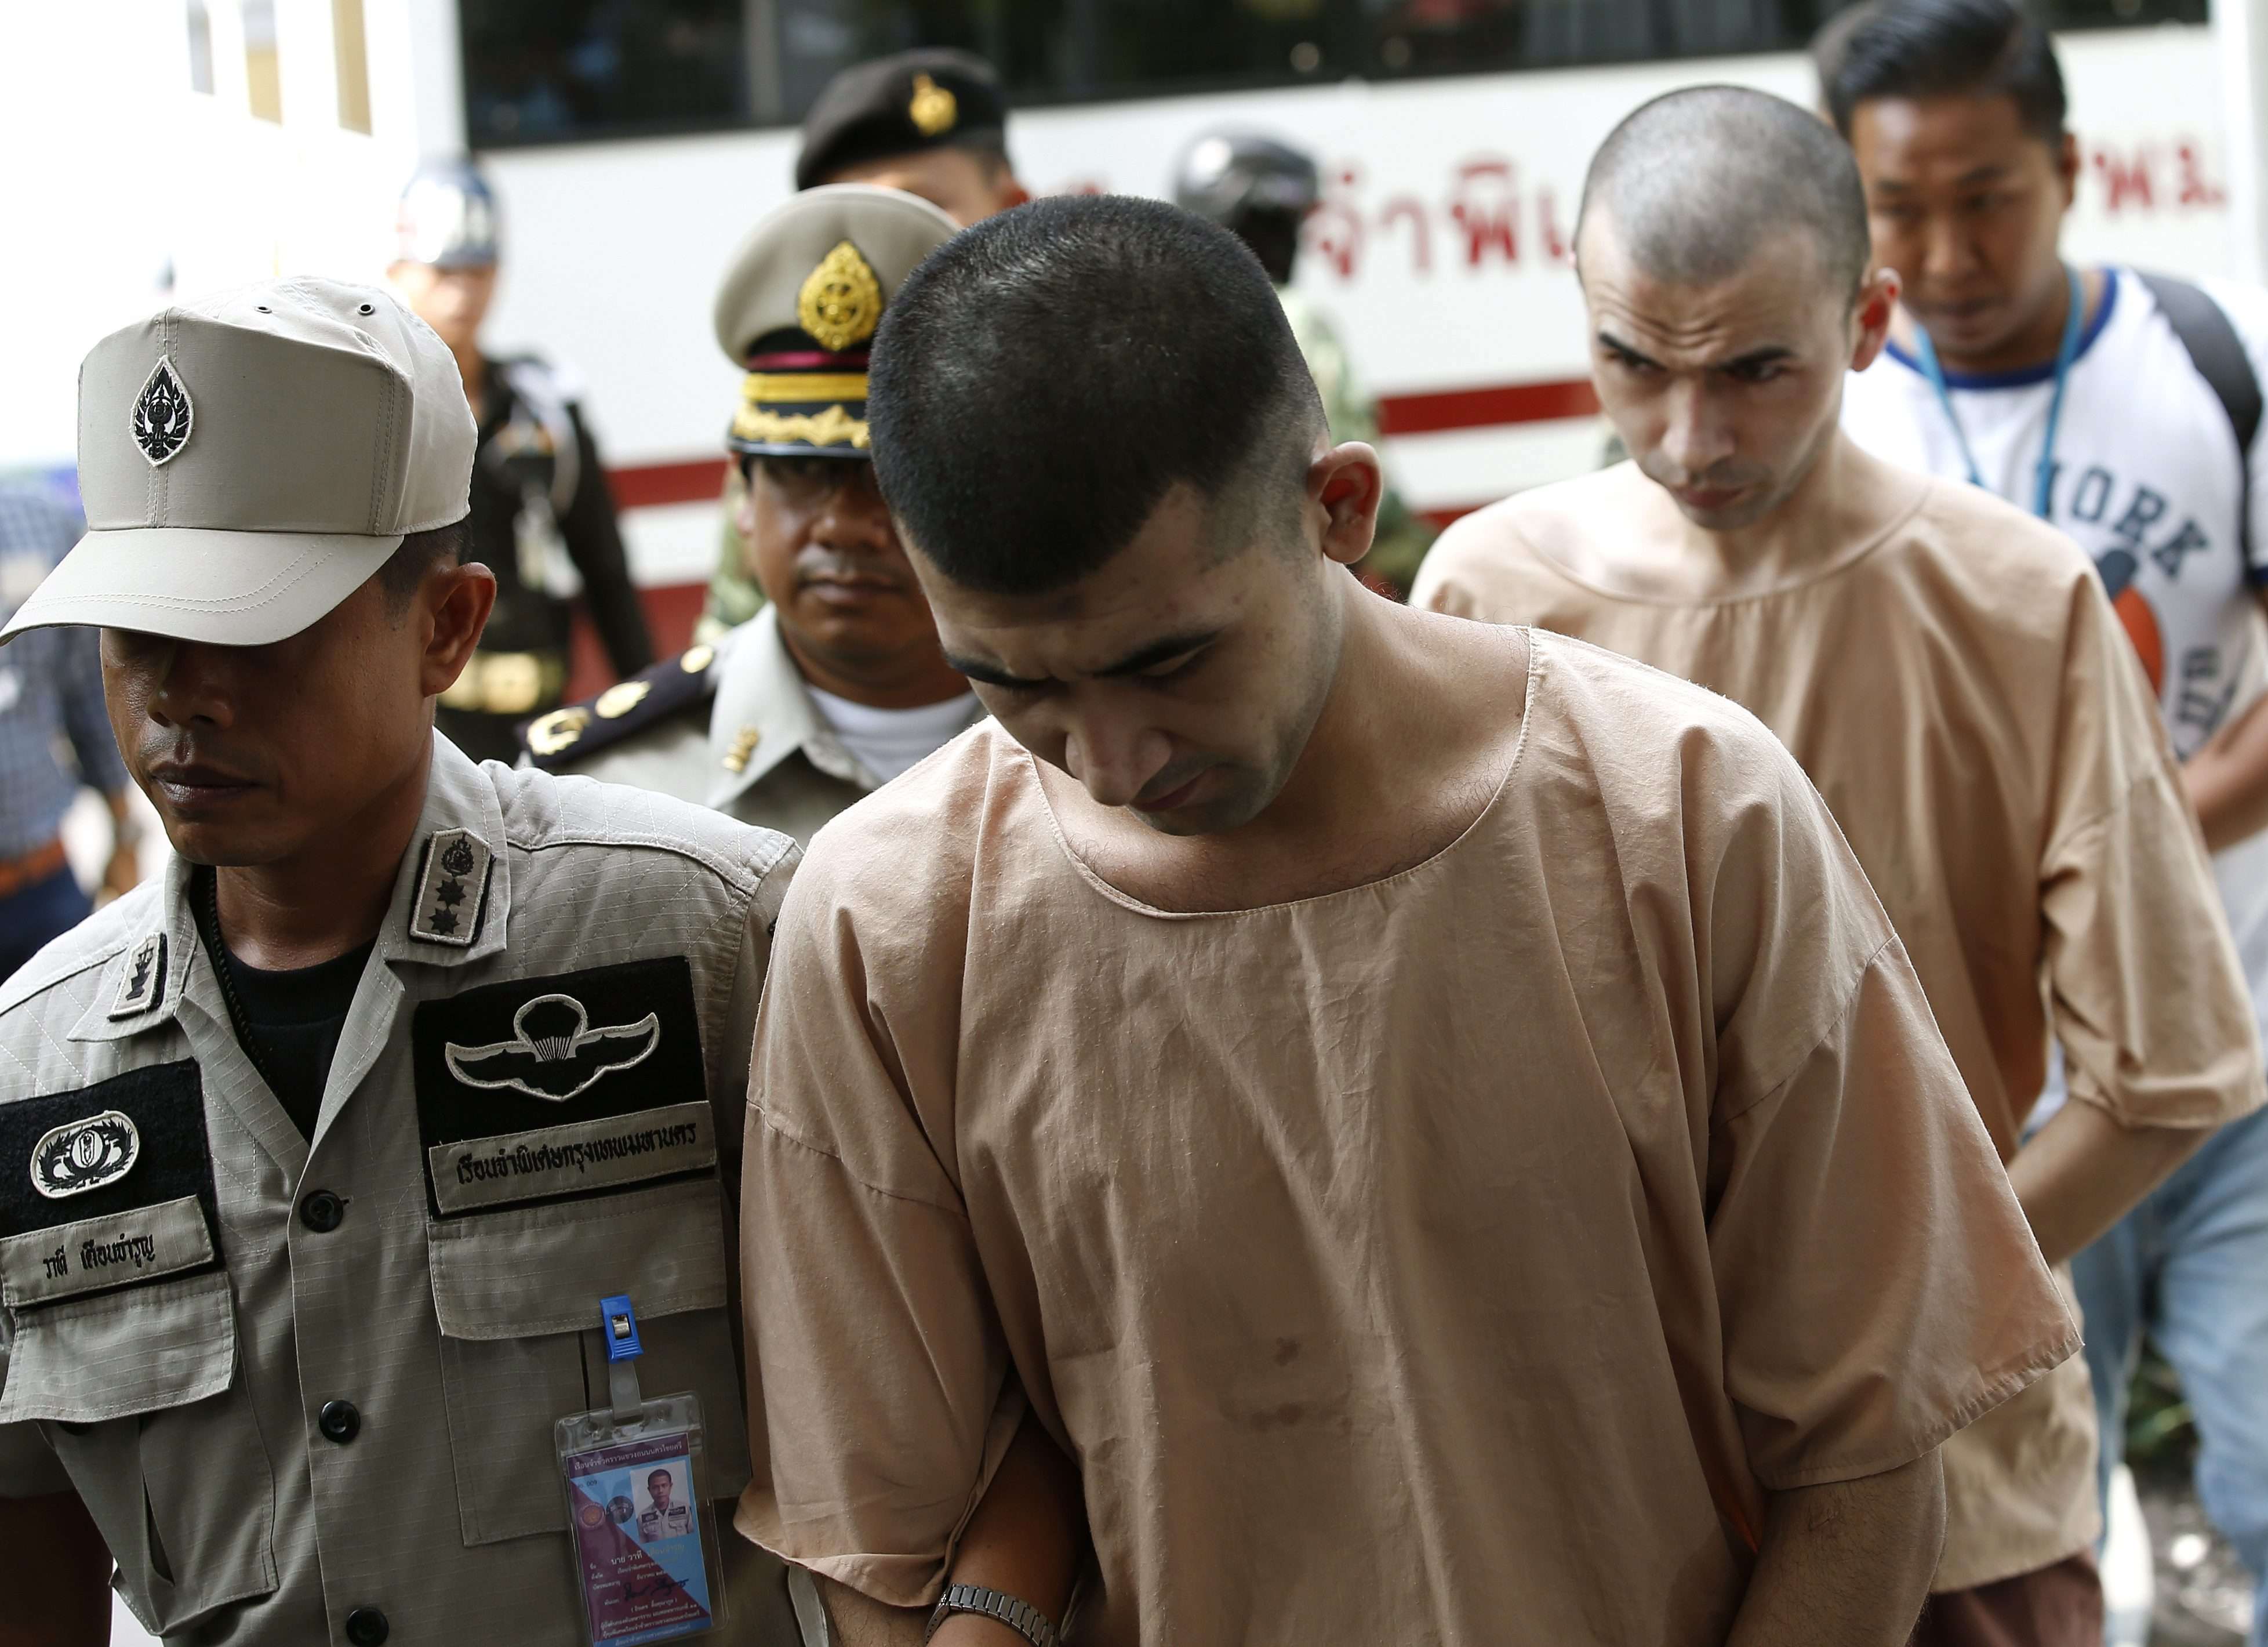 Alleged Erawan Shrine bombing suspects Yusufu Mieraili (centre) and Adem Karadag (back) are escorted by police officers and prison personnel as they arrive at the Military Court in Bangkok, Thailand on 20 April 2016. Photo: EPA